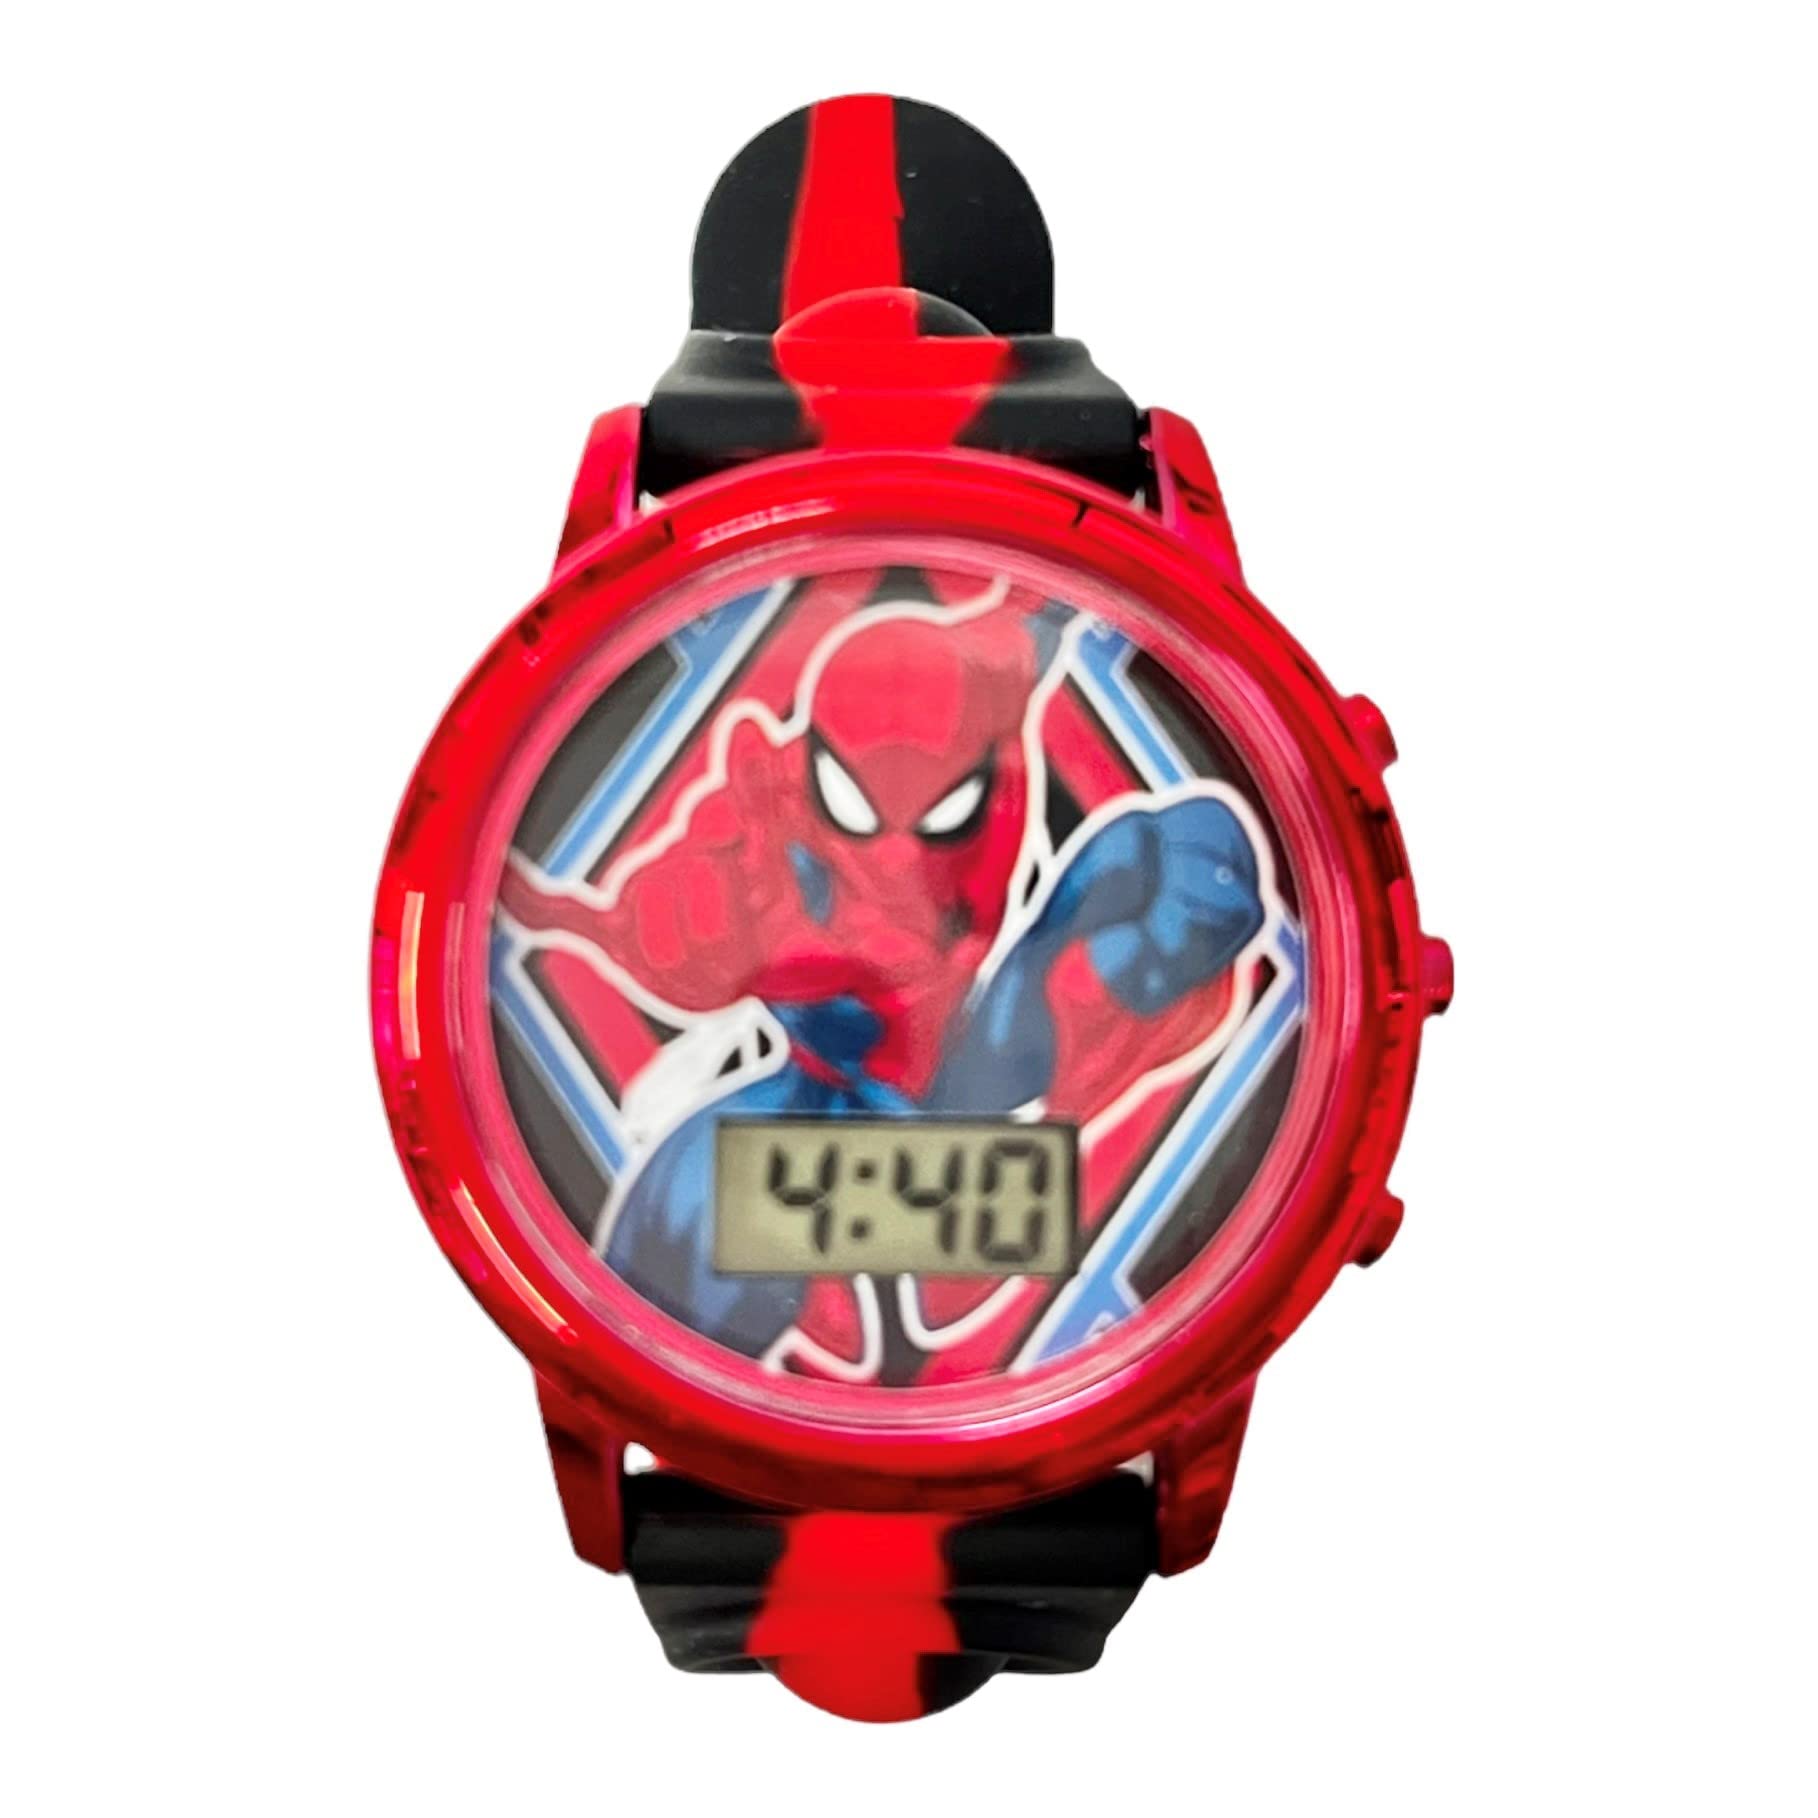 Accutime Kids Marvel Spiderman Red Digital LCD Quartz Wrist-Watch with Multicolor Flashing Popper Strap for Boys, Girls and Toddlers (Model: SPD4845AZ)